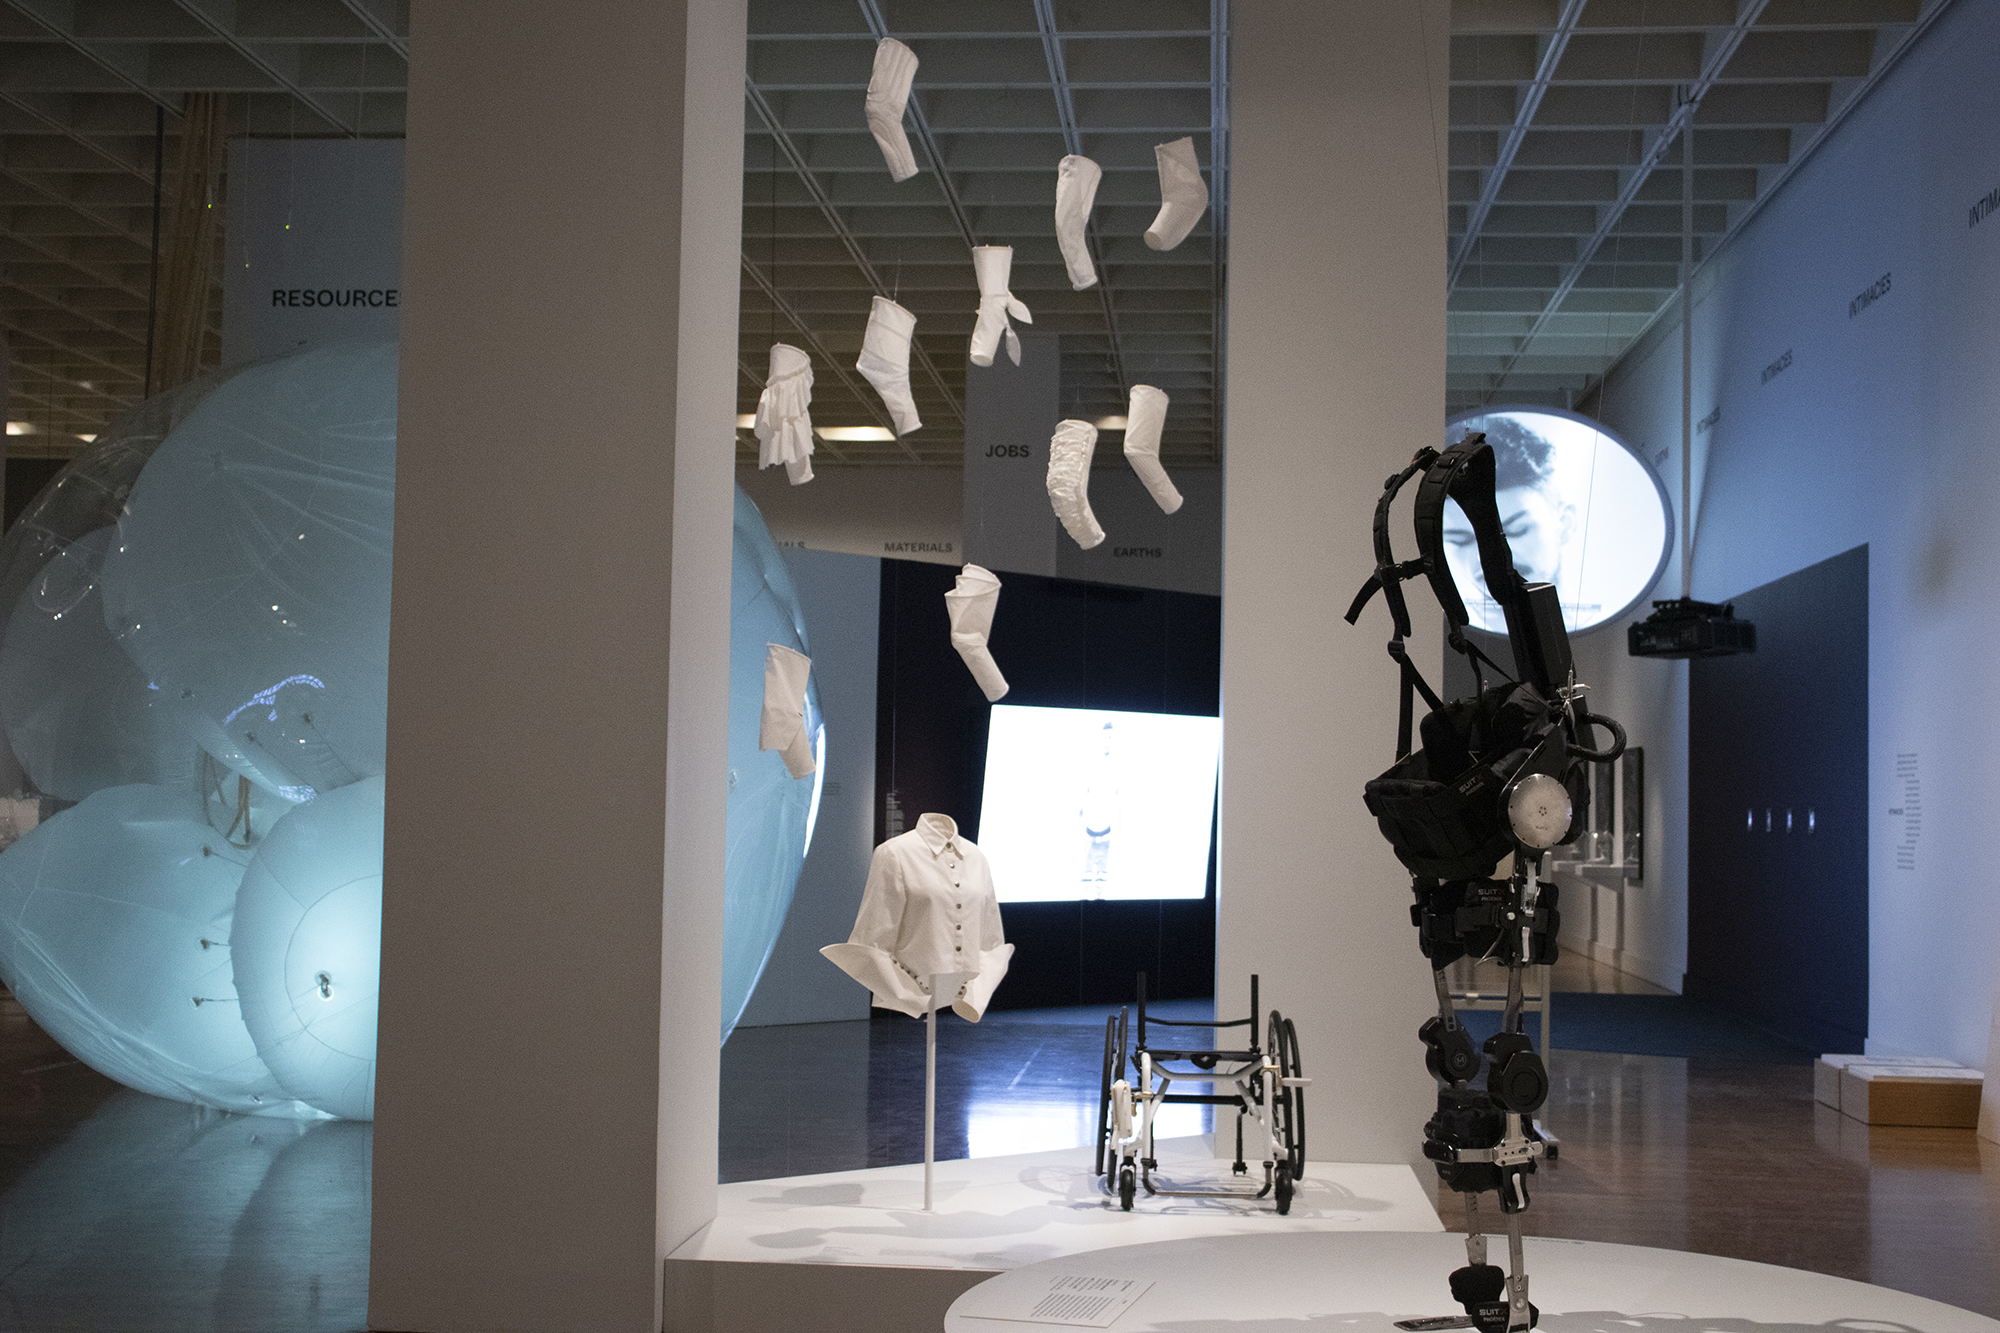 View of white garments hanging at the Designs for Different Futures exhibit, with a white shirt on a stand and a futuristic wheelchair and mechanical upright walking device on display.